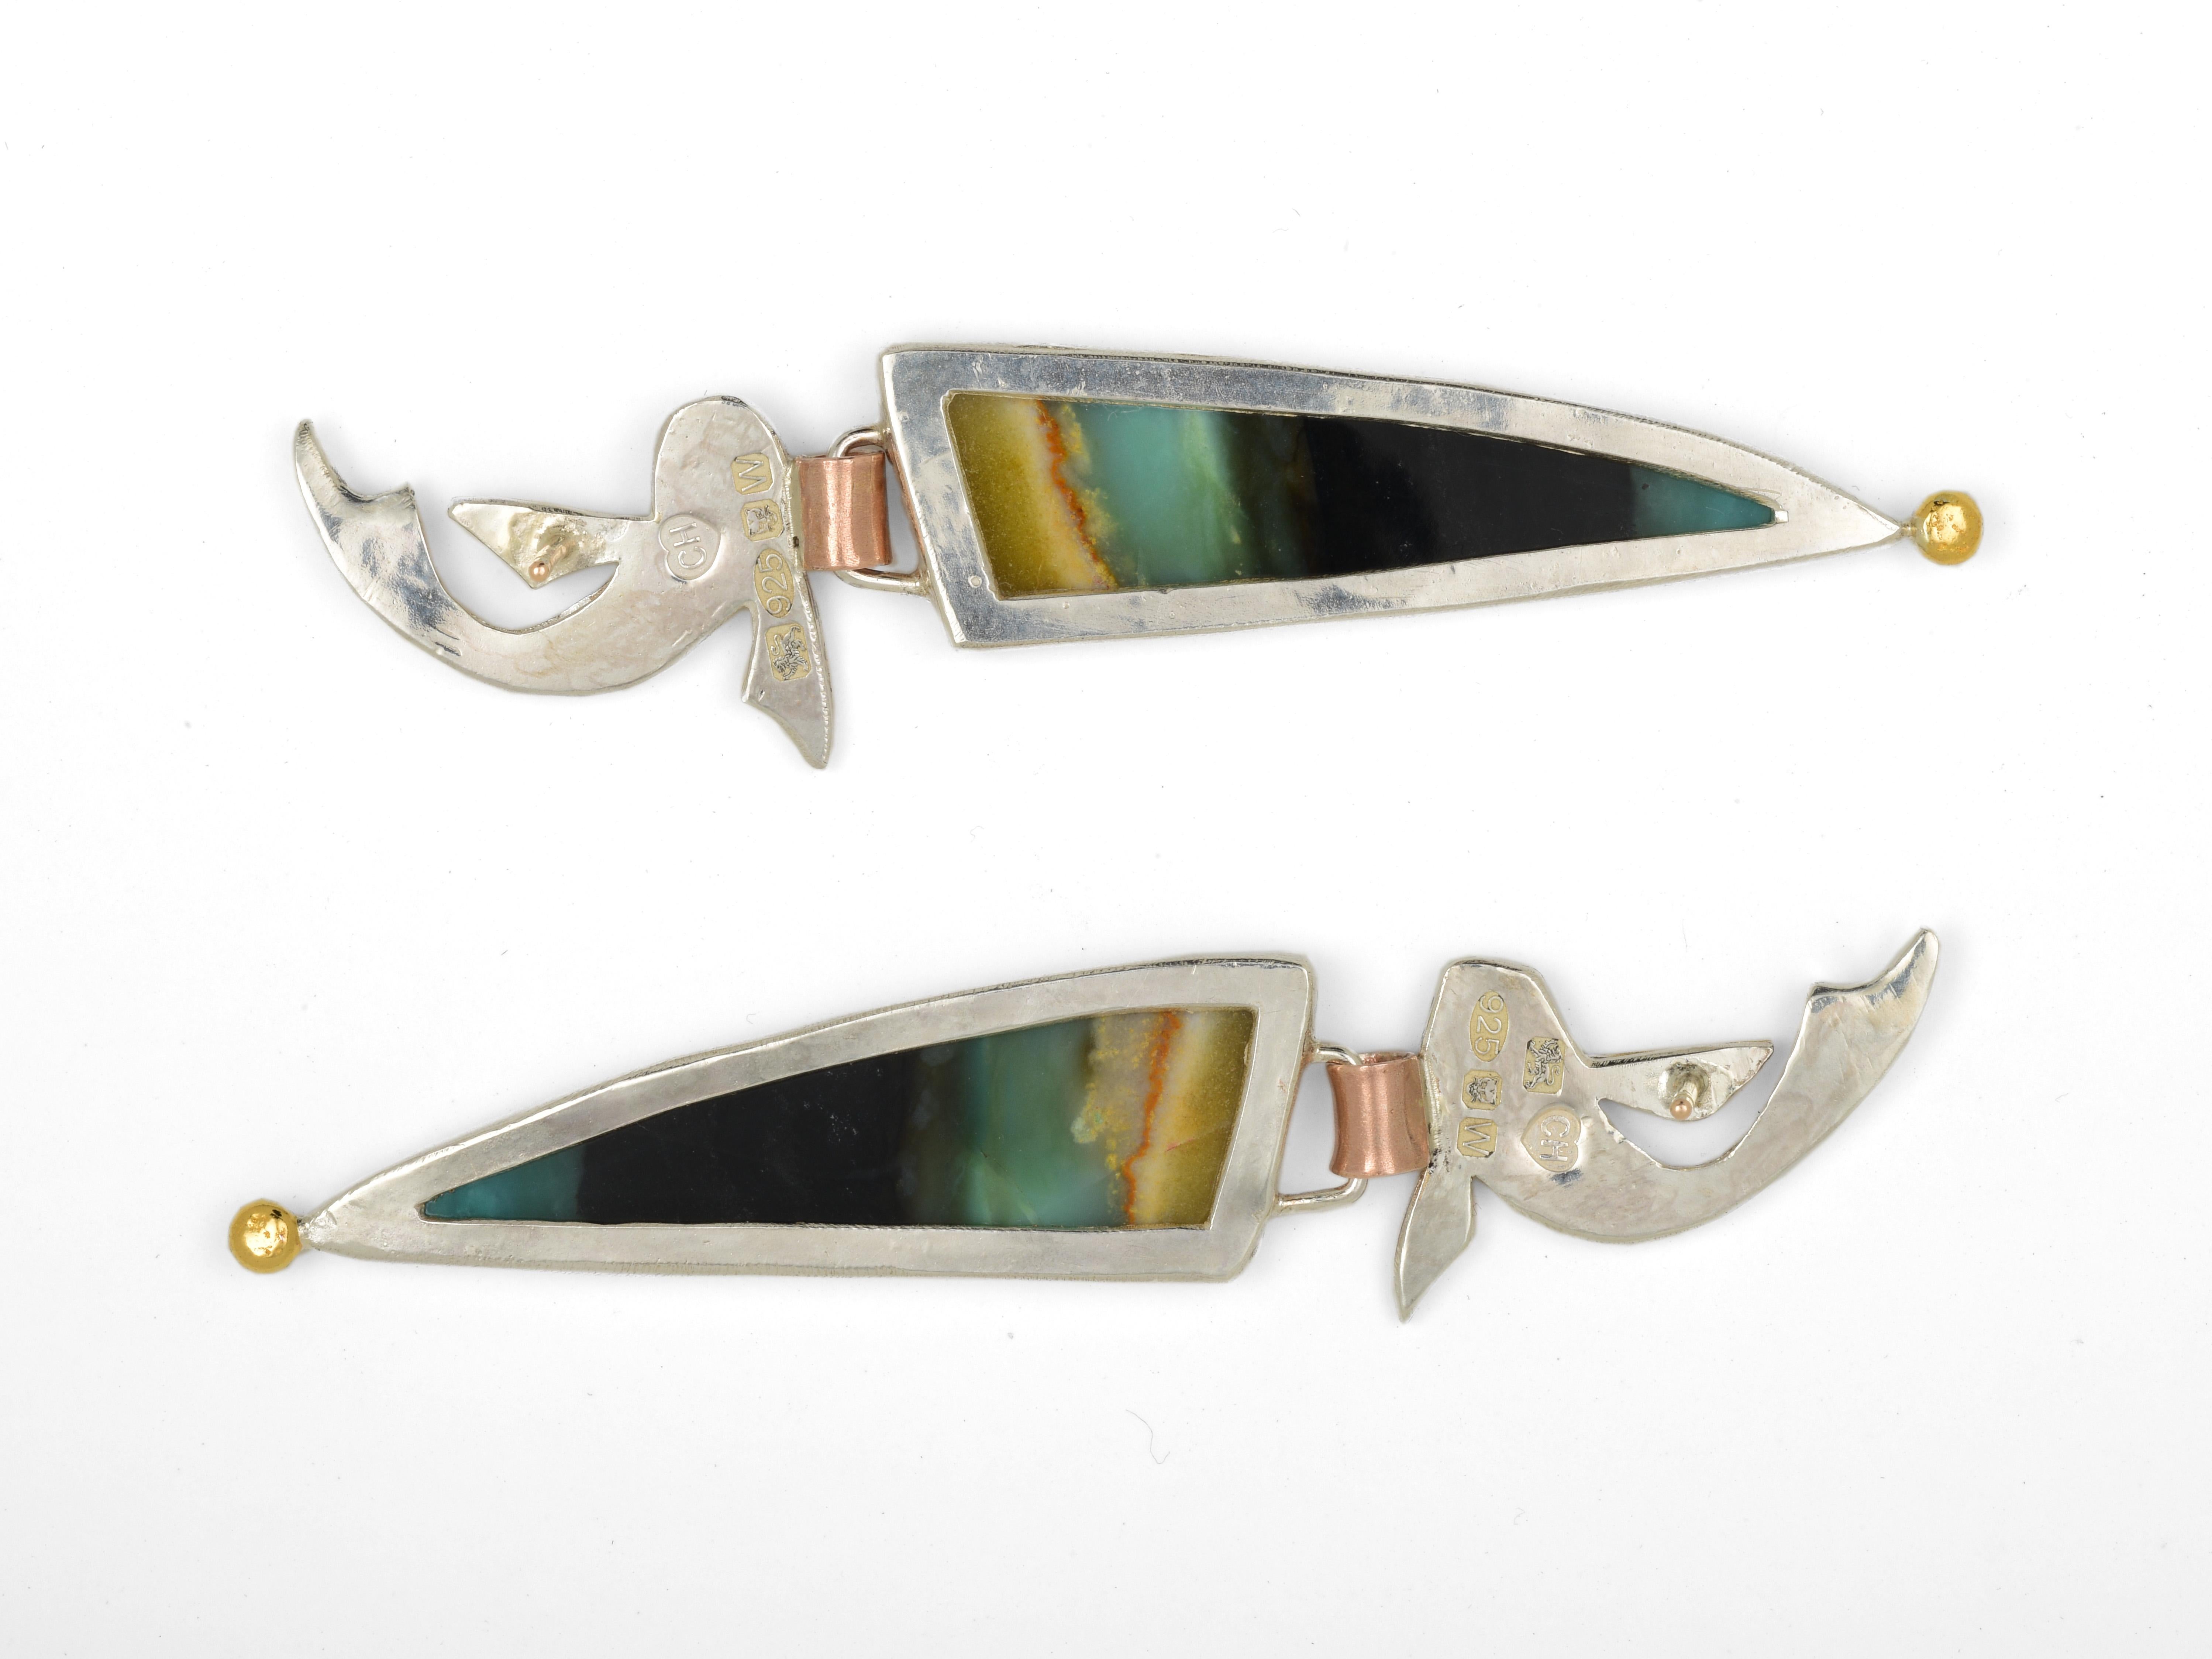 Mixed Cut Fish Earrings with Opalized Wood Stones, 22 and 18 Karat Yellow Gold and Silver